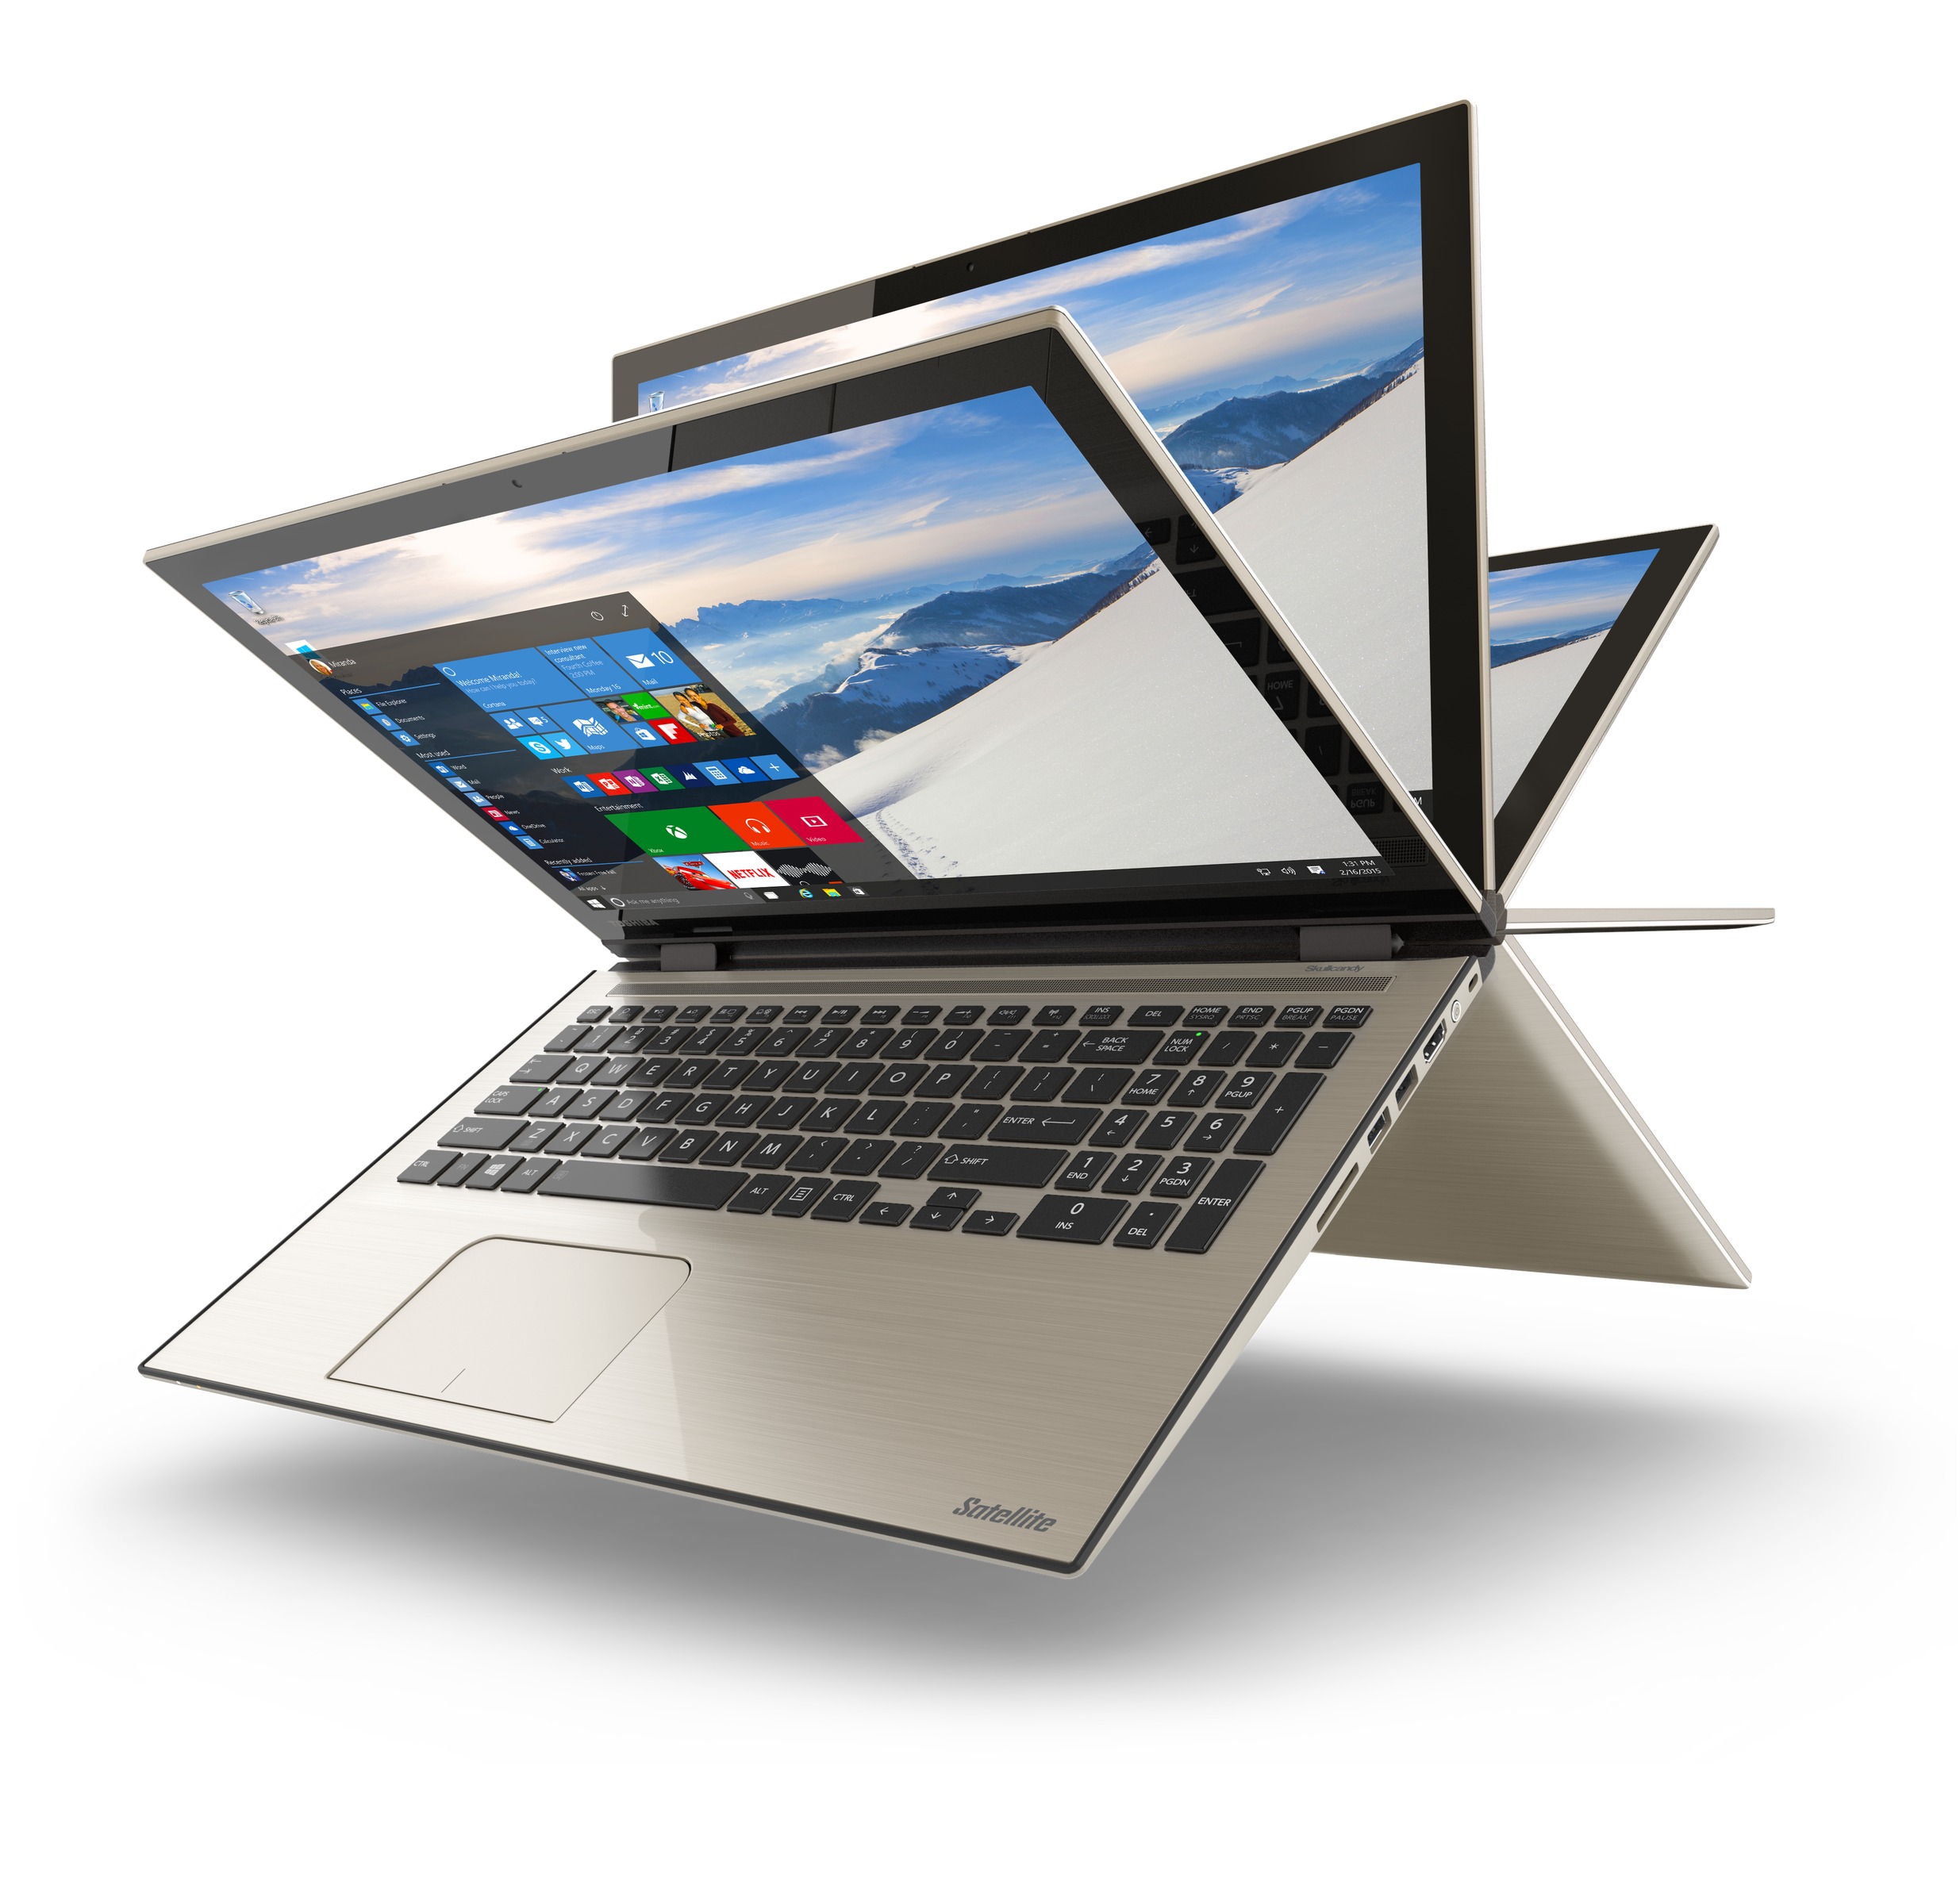 Toshiba announces new PCs built for Windows 10, featuring 